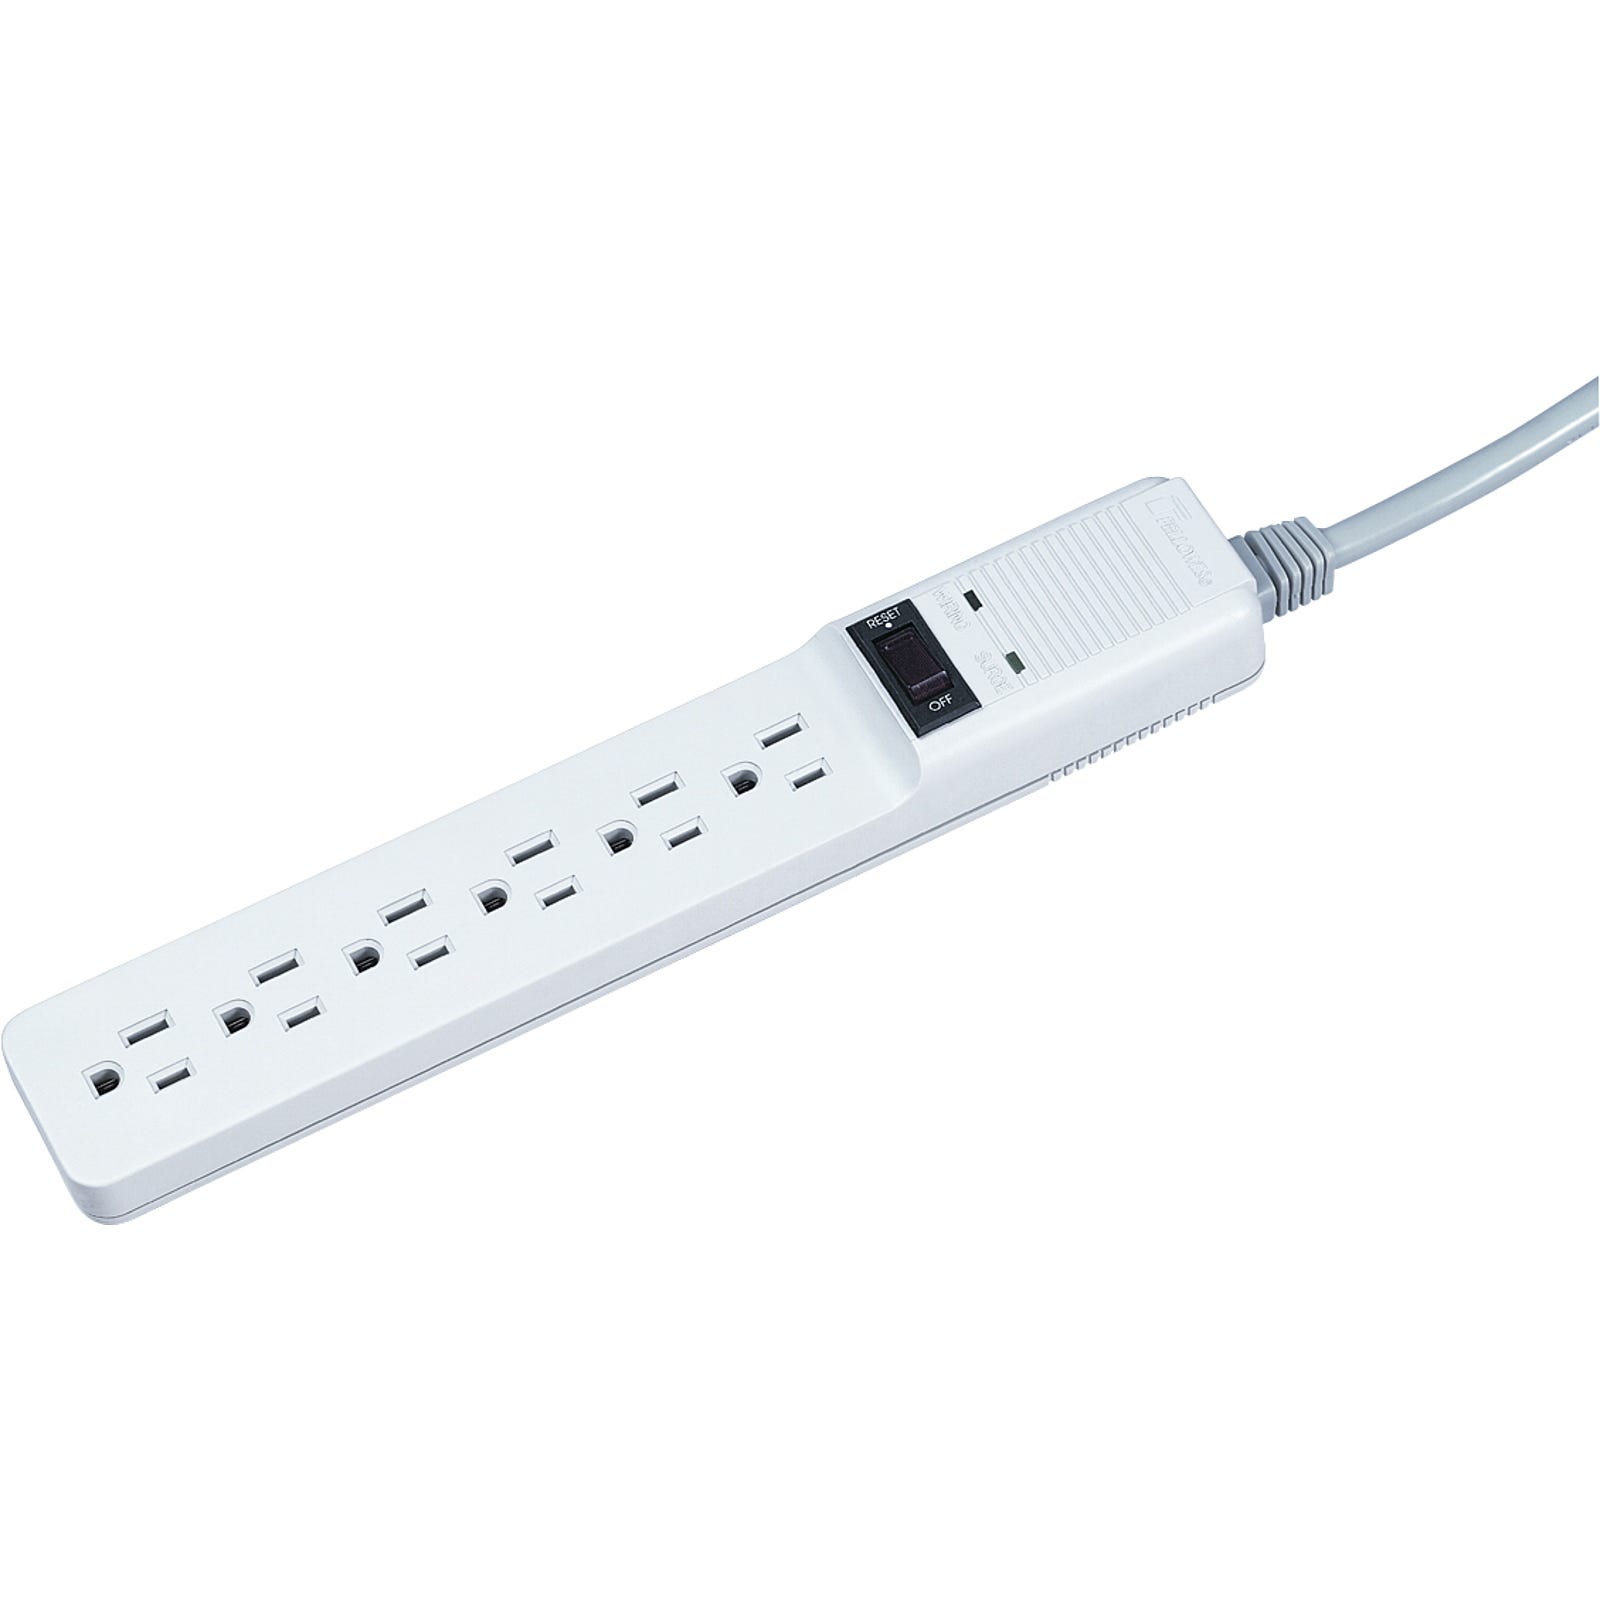 Power Bar,Paragon,Kensington,SmartSockets,Surge Protector,AC Adapters,Extension Cord,Smith System,Belkin,Power Module,Connectrac,PowerCube,USB Adapter,Outlet Adapter,AC Outlet,Retractable,Cable-Path Tape,Demco,Demco Canada,Gaylord,Gaylord Canada,Canadian Museum Library Supply,Canadian Library Supply,Library Supplies,Library Supplies in Canada,Carr Maclean,Brodart,The Library Store,Amazon,Metis business in Alberta,Metis business in Canada,Metis business,women owned business,library supplies in western Canada,library supplies in Alberta,library supply company,library supply vendors,library suppliers,library supplies Canada,library supplies for schools,store library,Calgary library store,library supplies catalogue,demco library supplies,library store,demco office supplies,gaylord museum products,museum store Canada,Wayfair